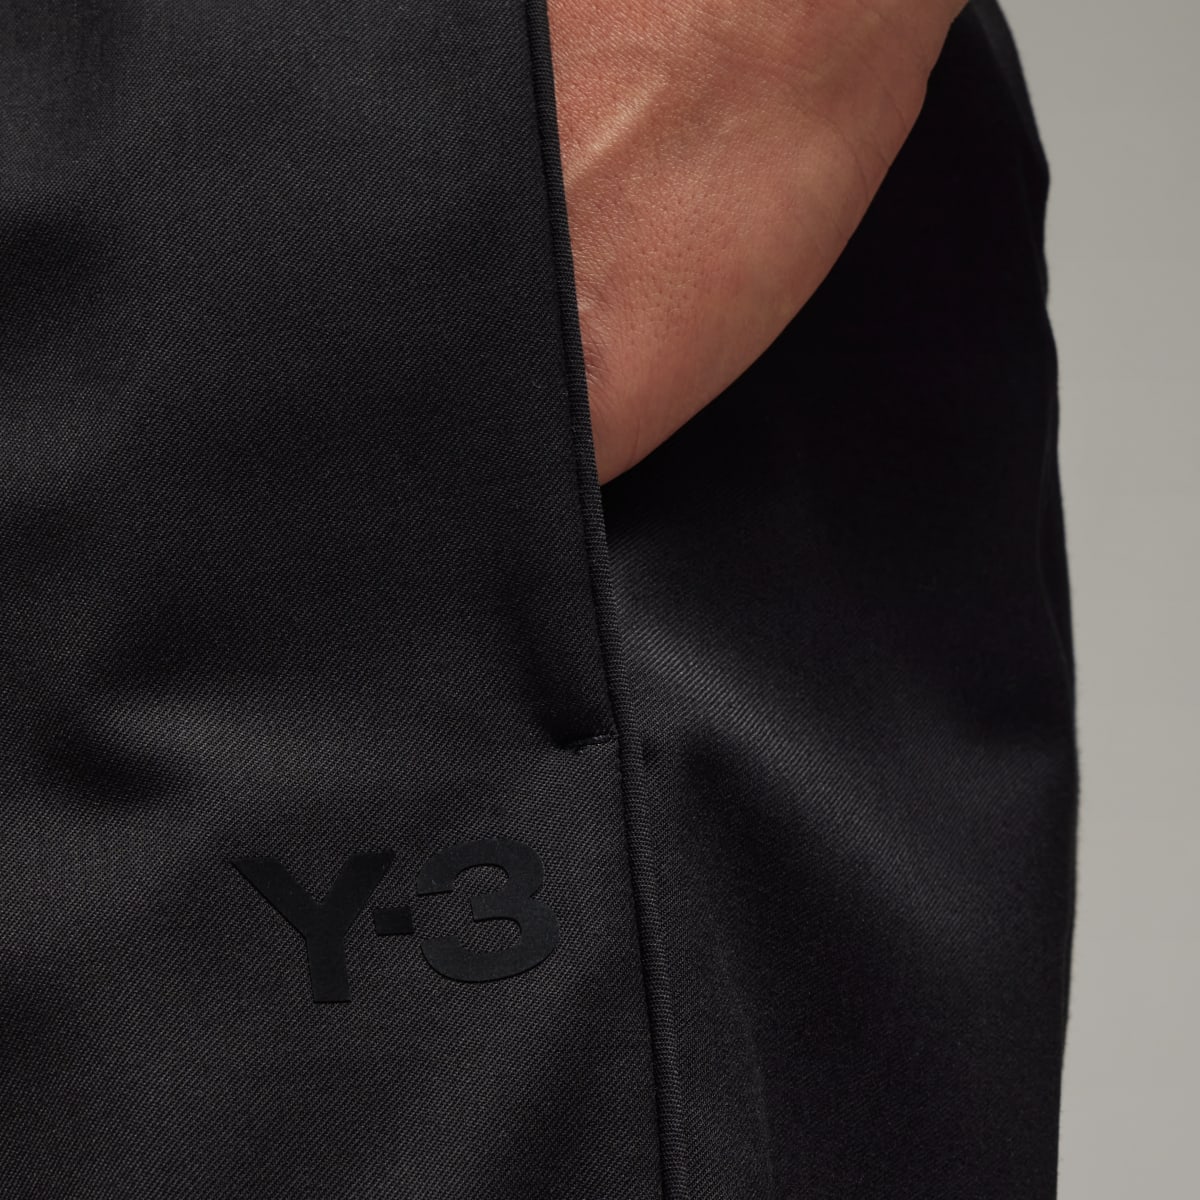 Adidas Y-3 Refined Woven Straight Leg Tracksuit Bottoms. 7